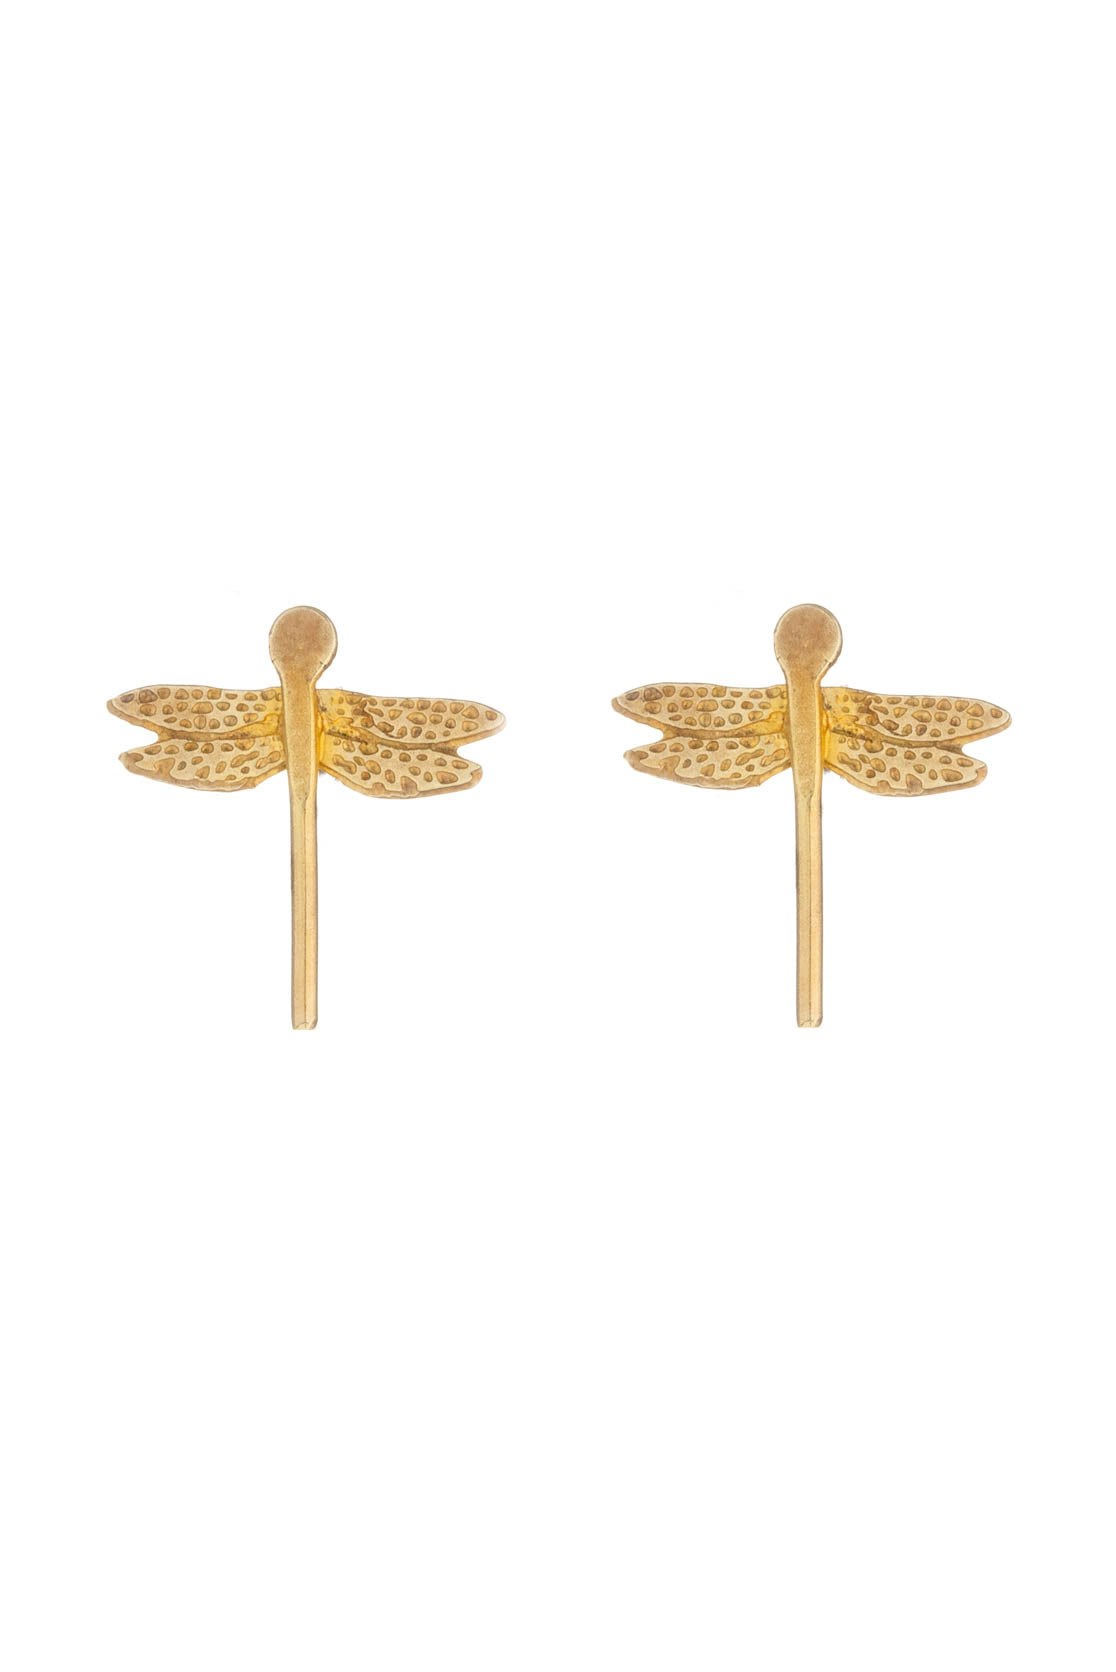 Dragonfly Studs - handmade in sterling silver